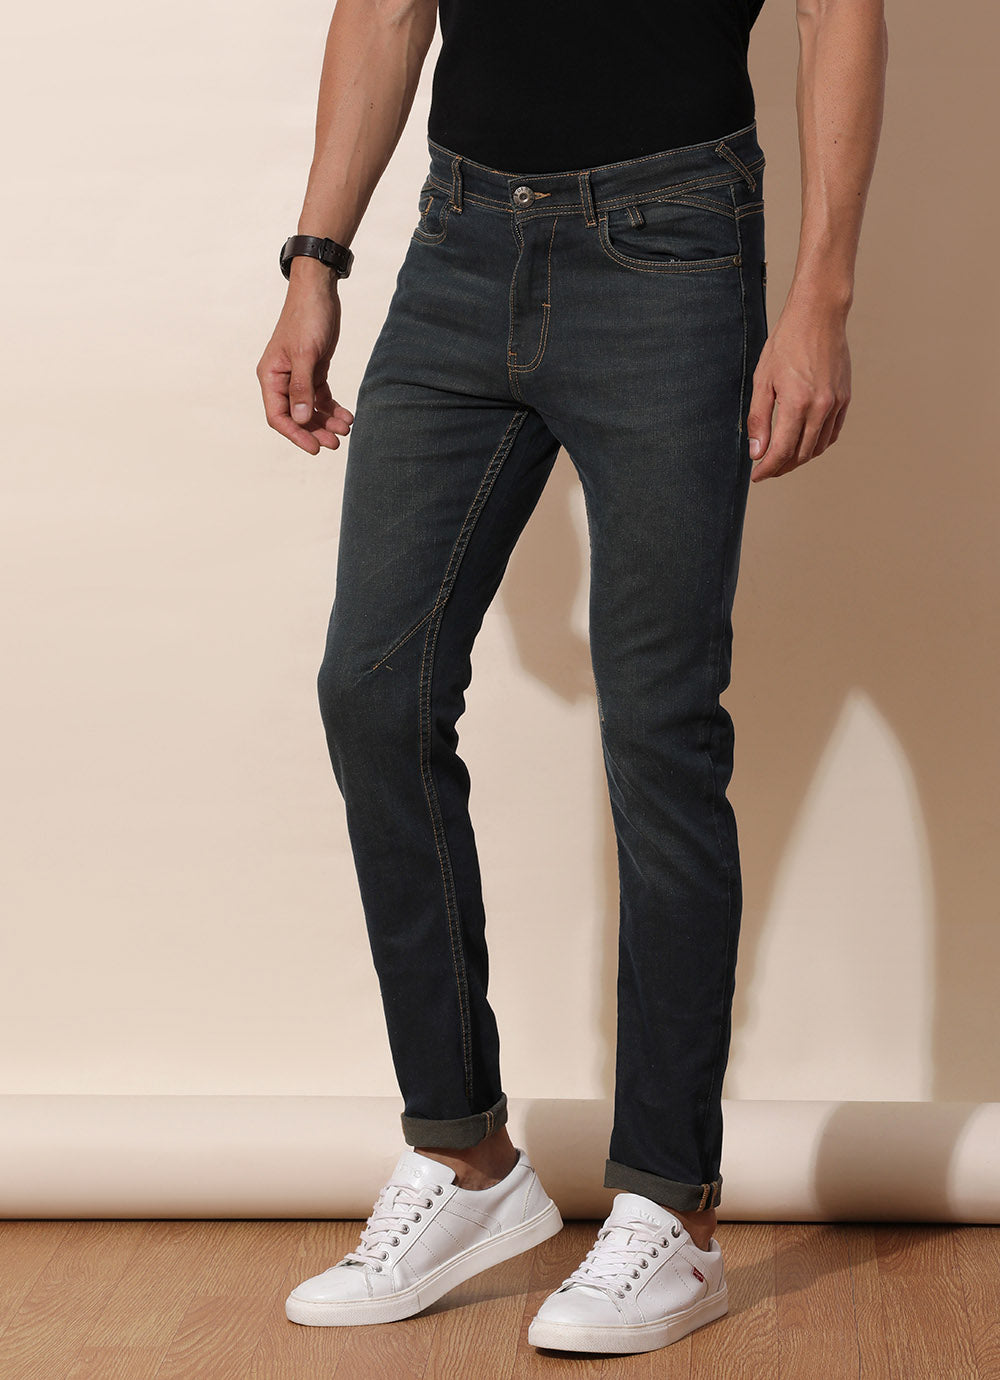 Agean Blue (Jeans Featuring Regular Pockets,Crafted From Twill Fabric)